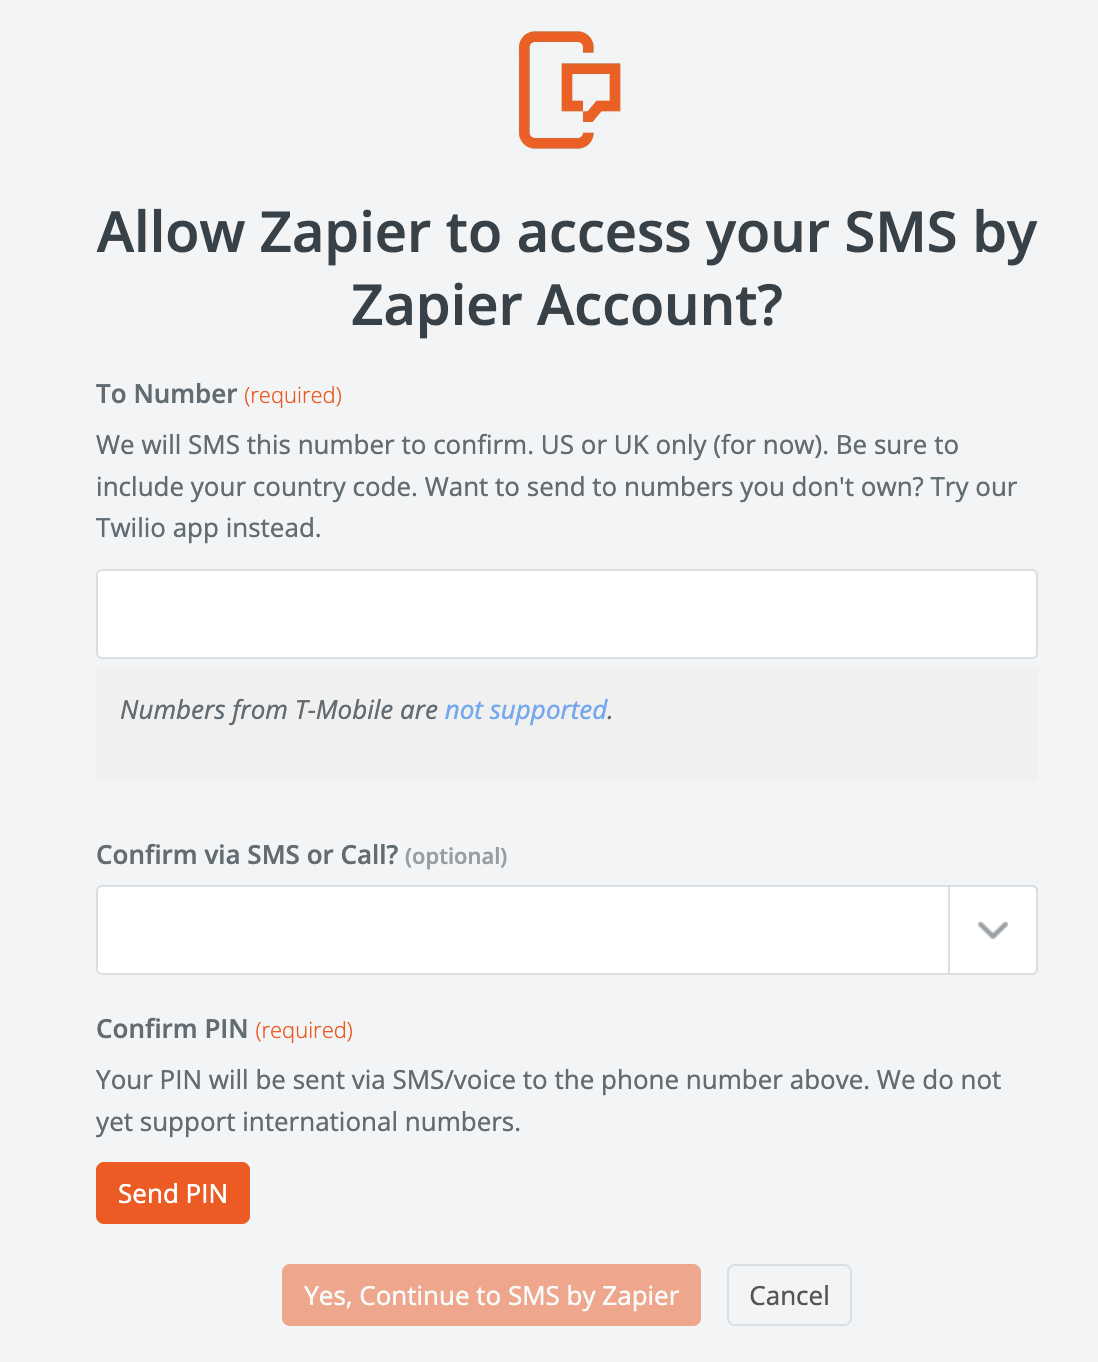 Fill in the required fields to authorize your SMS account